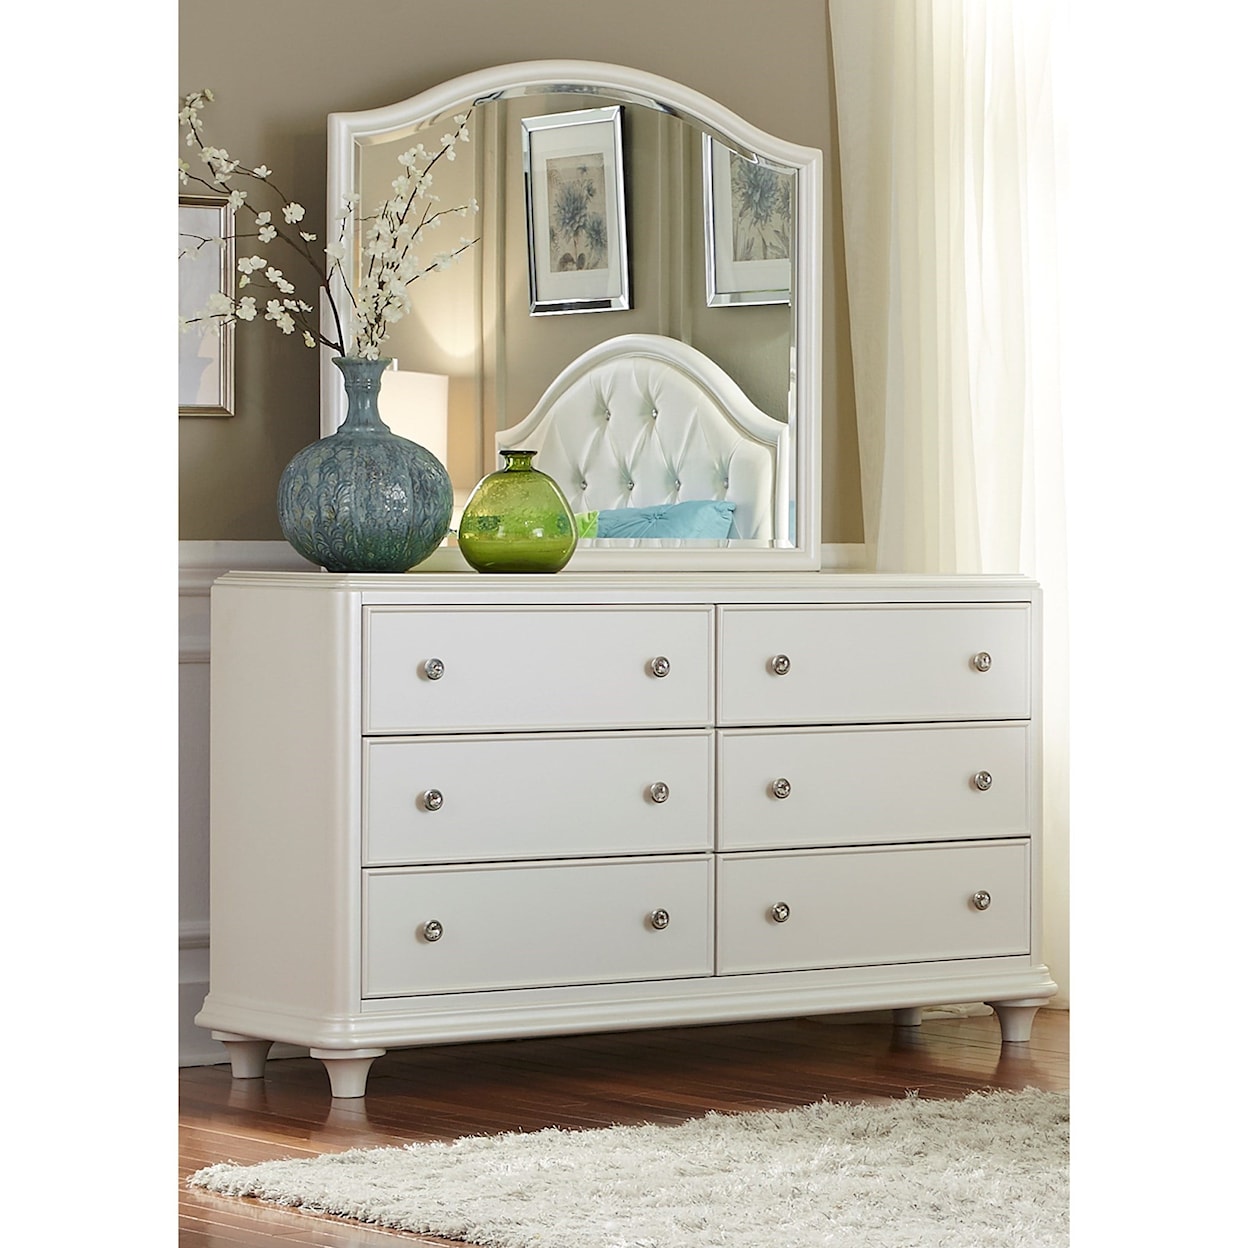 Libby Stardust 6-Drawer Dresser with Arched Mirror